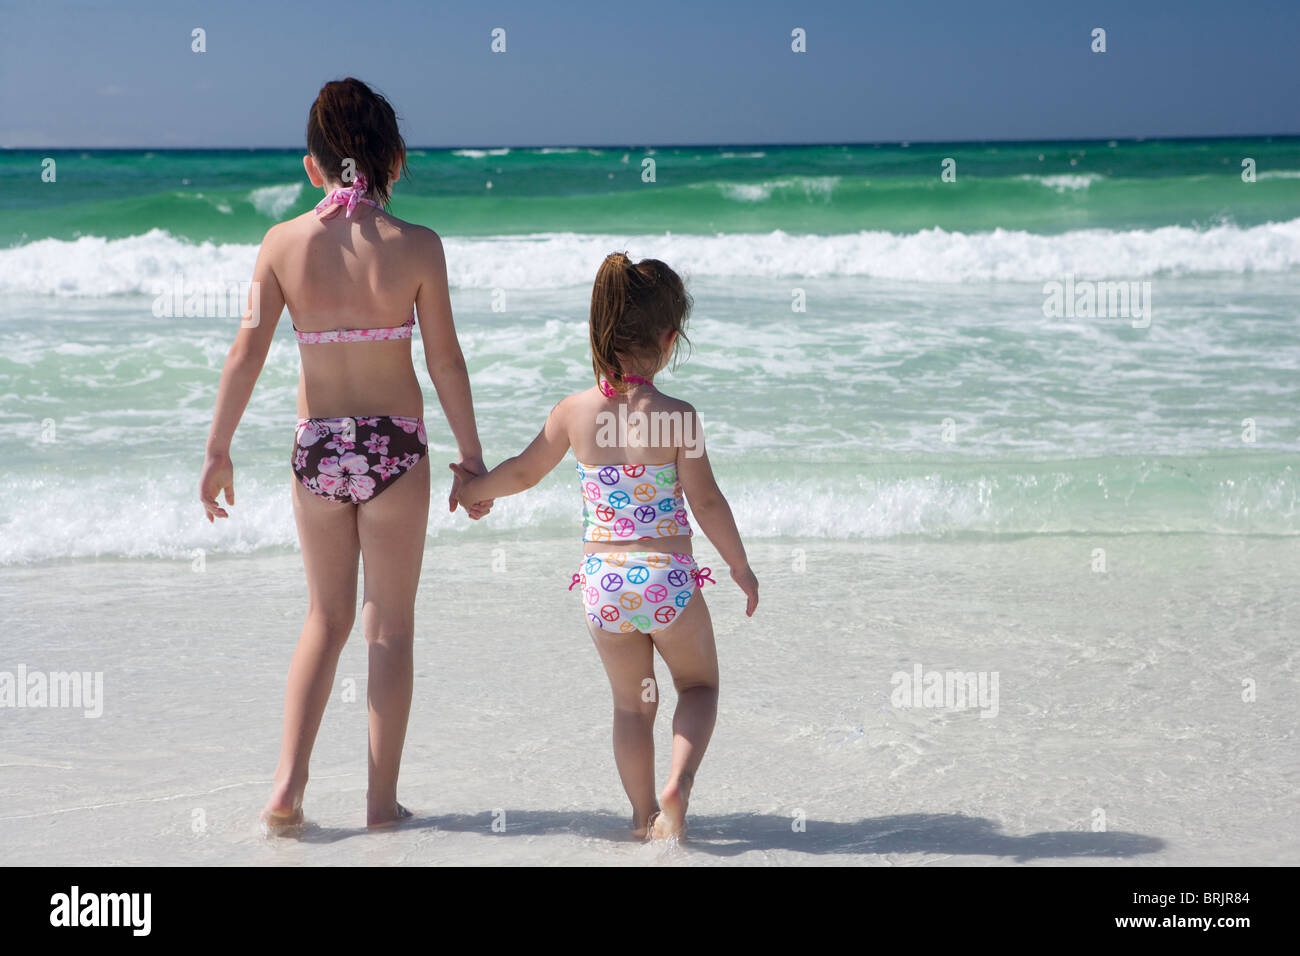 Two little girls in bikinis are holding hands at shoreline with the ocean in the background. Stock Photo